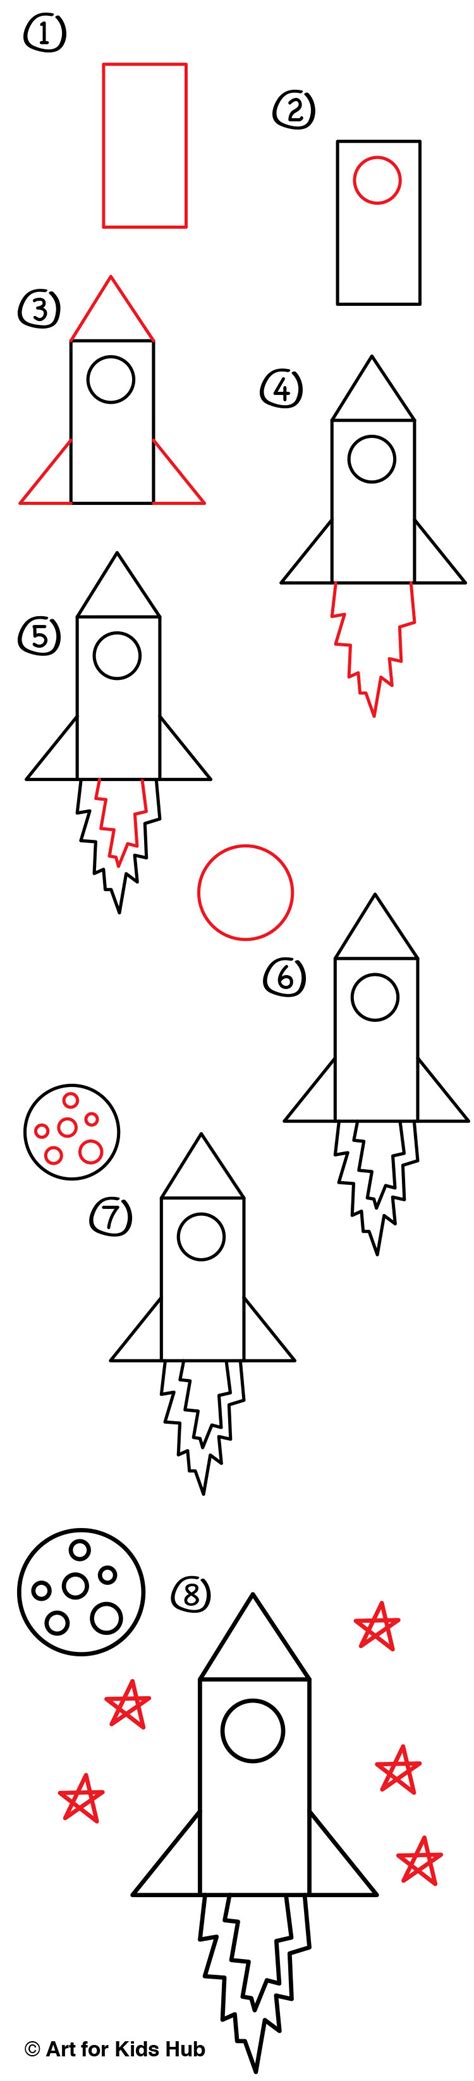 How To Draw A Rocket Young Artists Art For Kids Hub